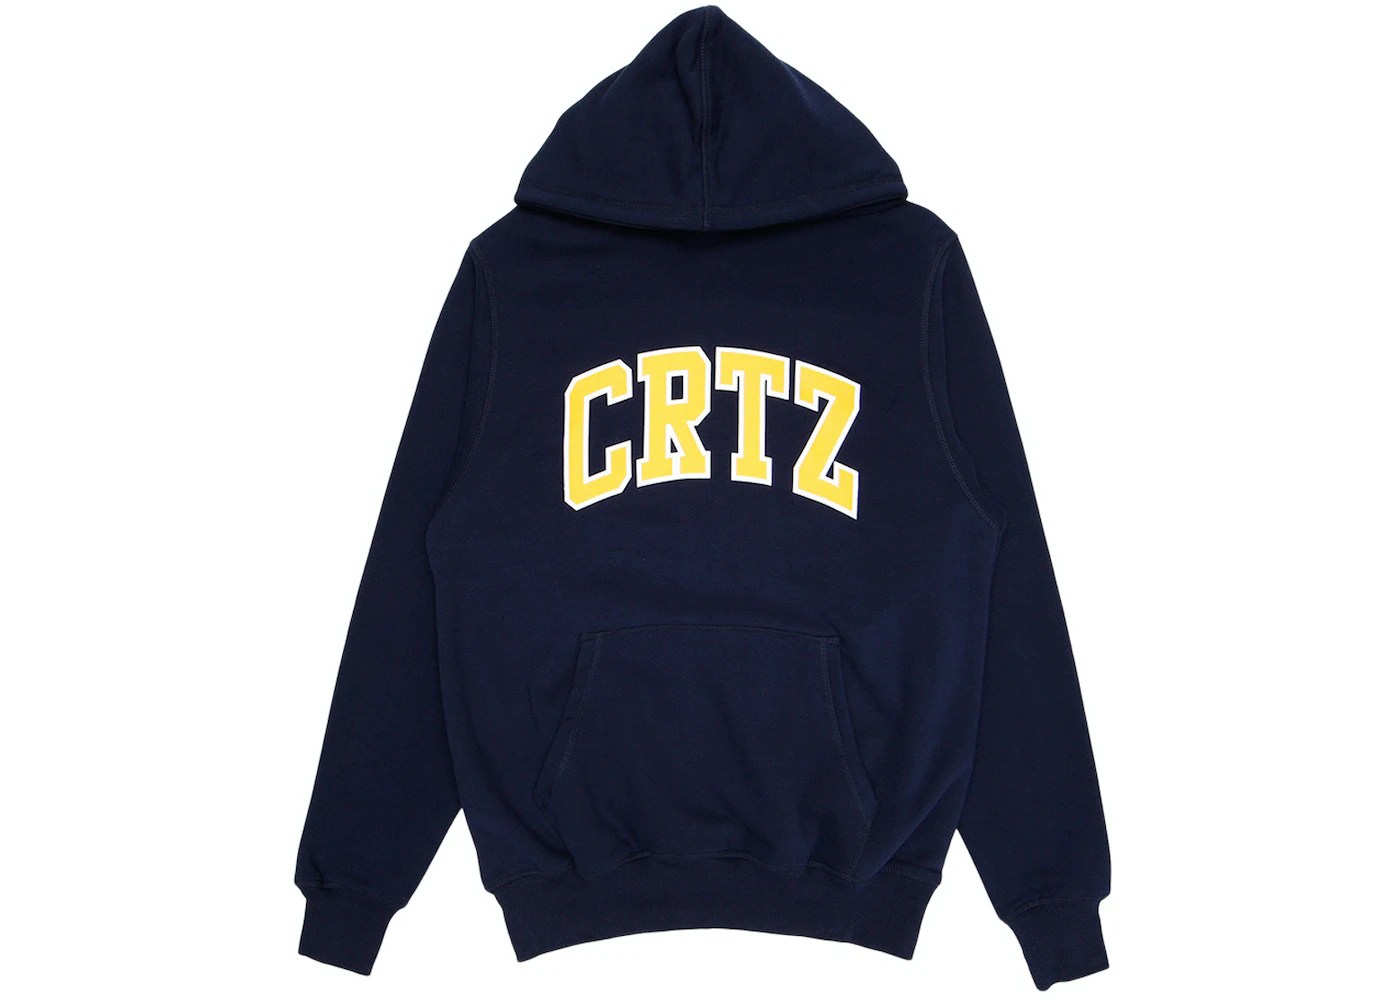 How Much Are CRTZ Hoodies